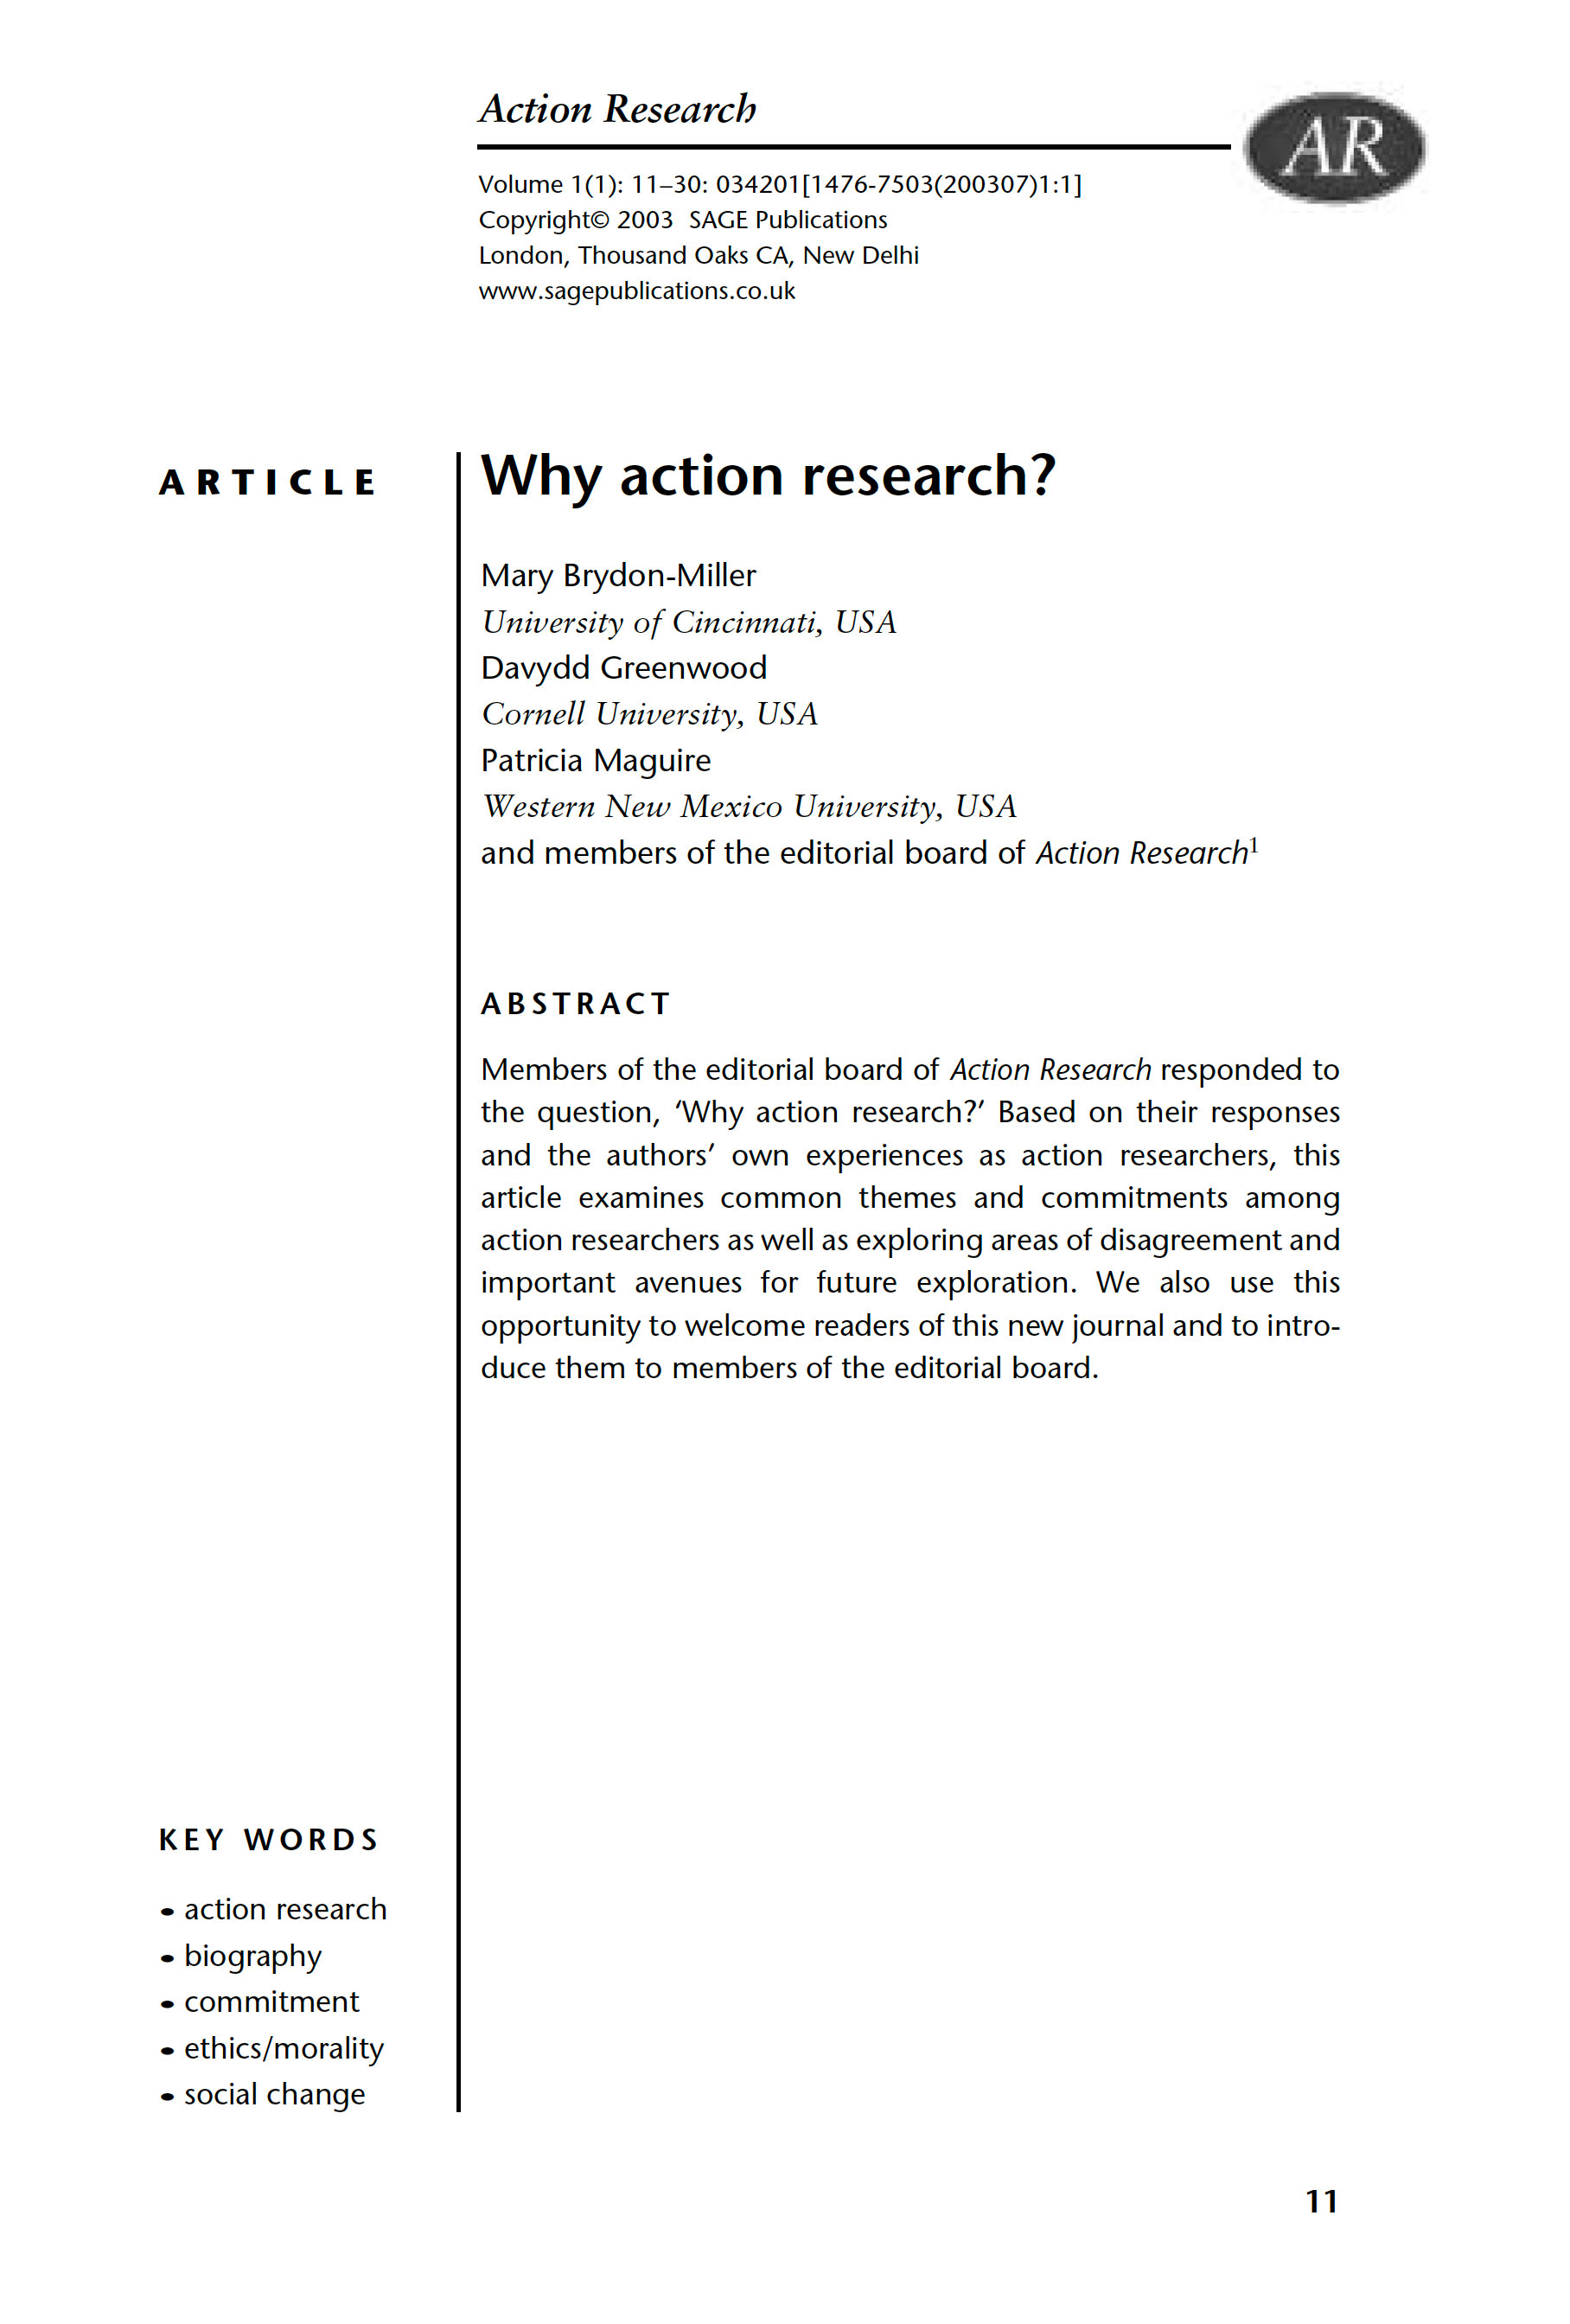 Why Action Research